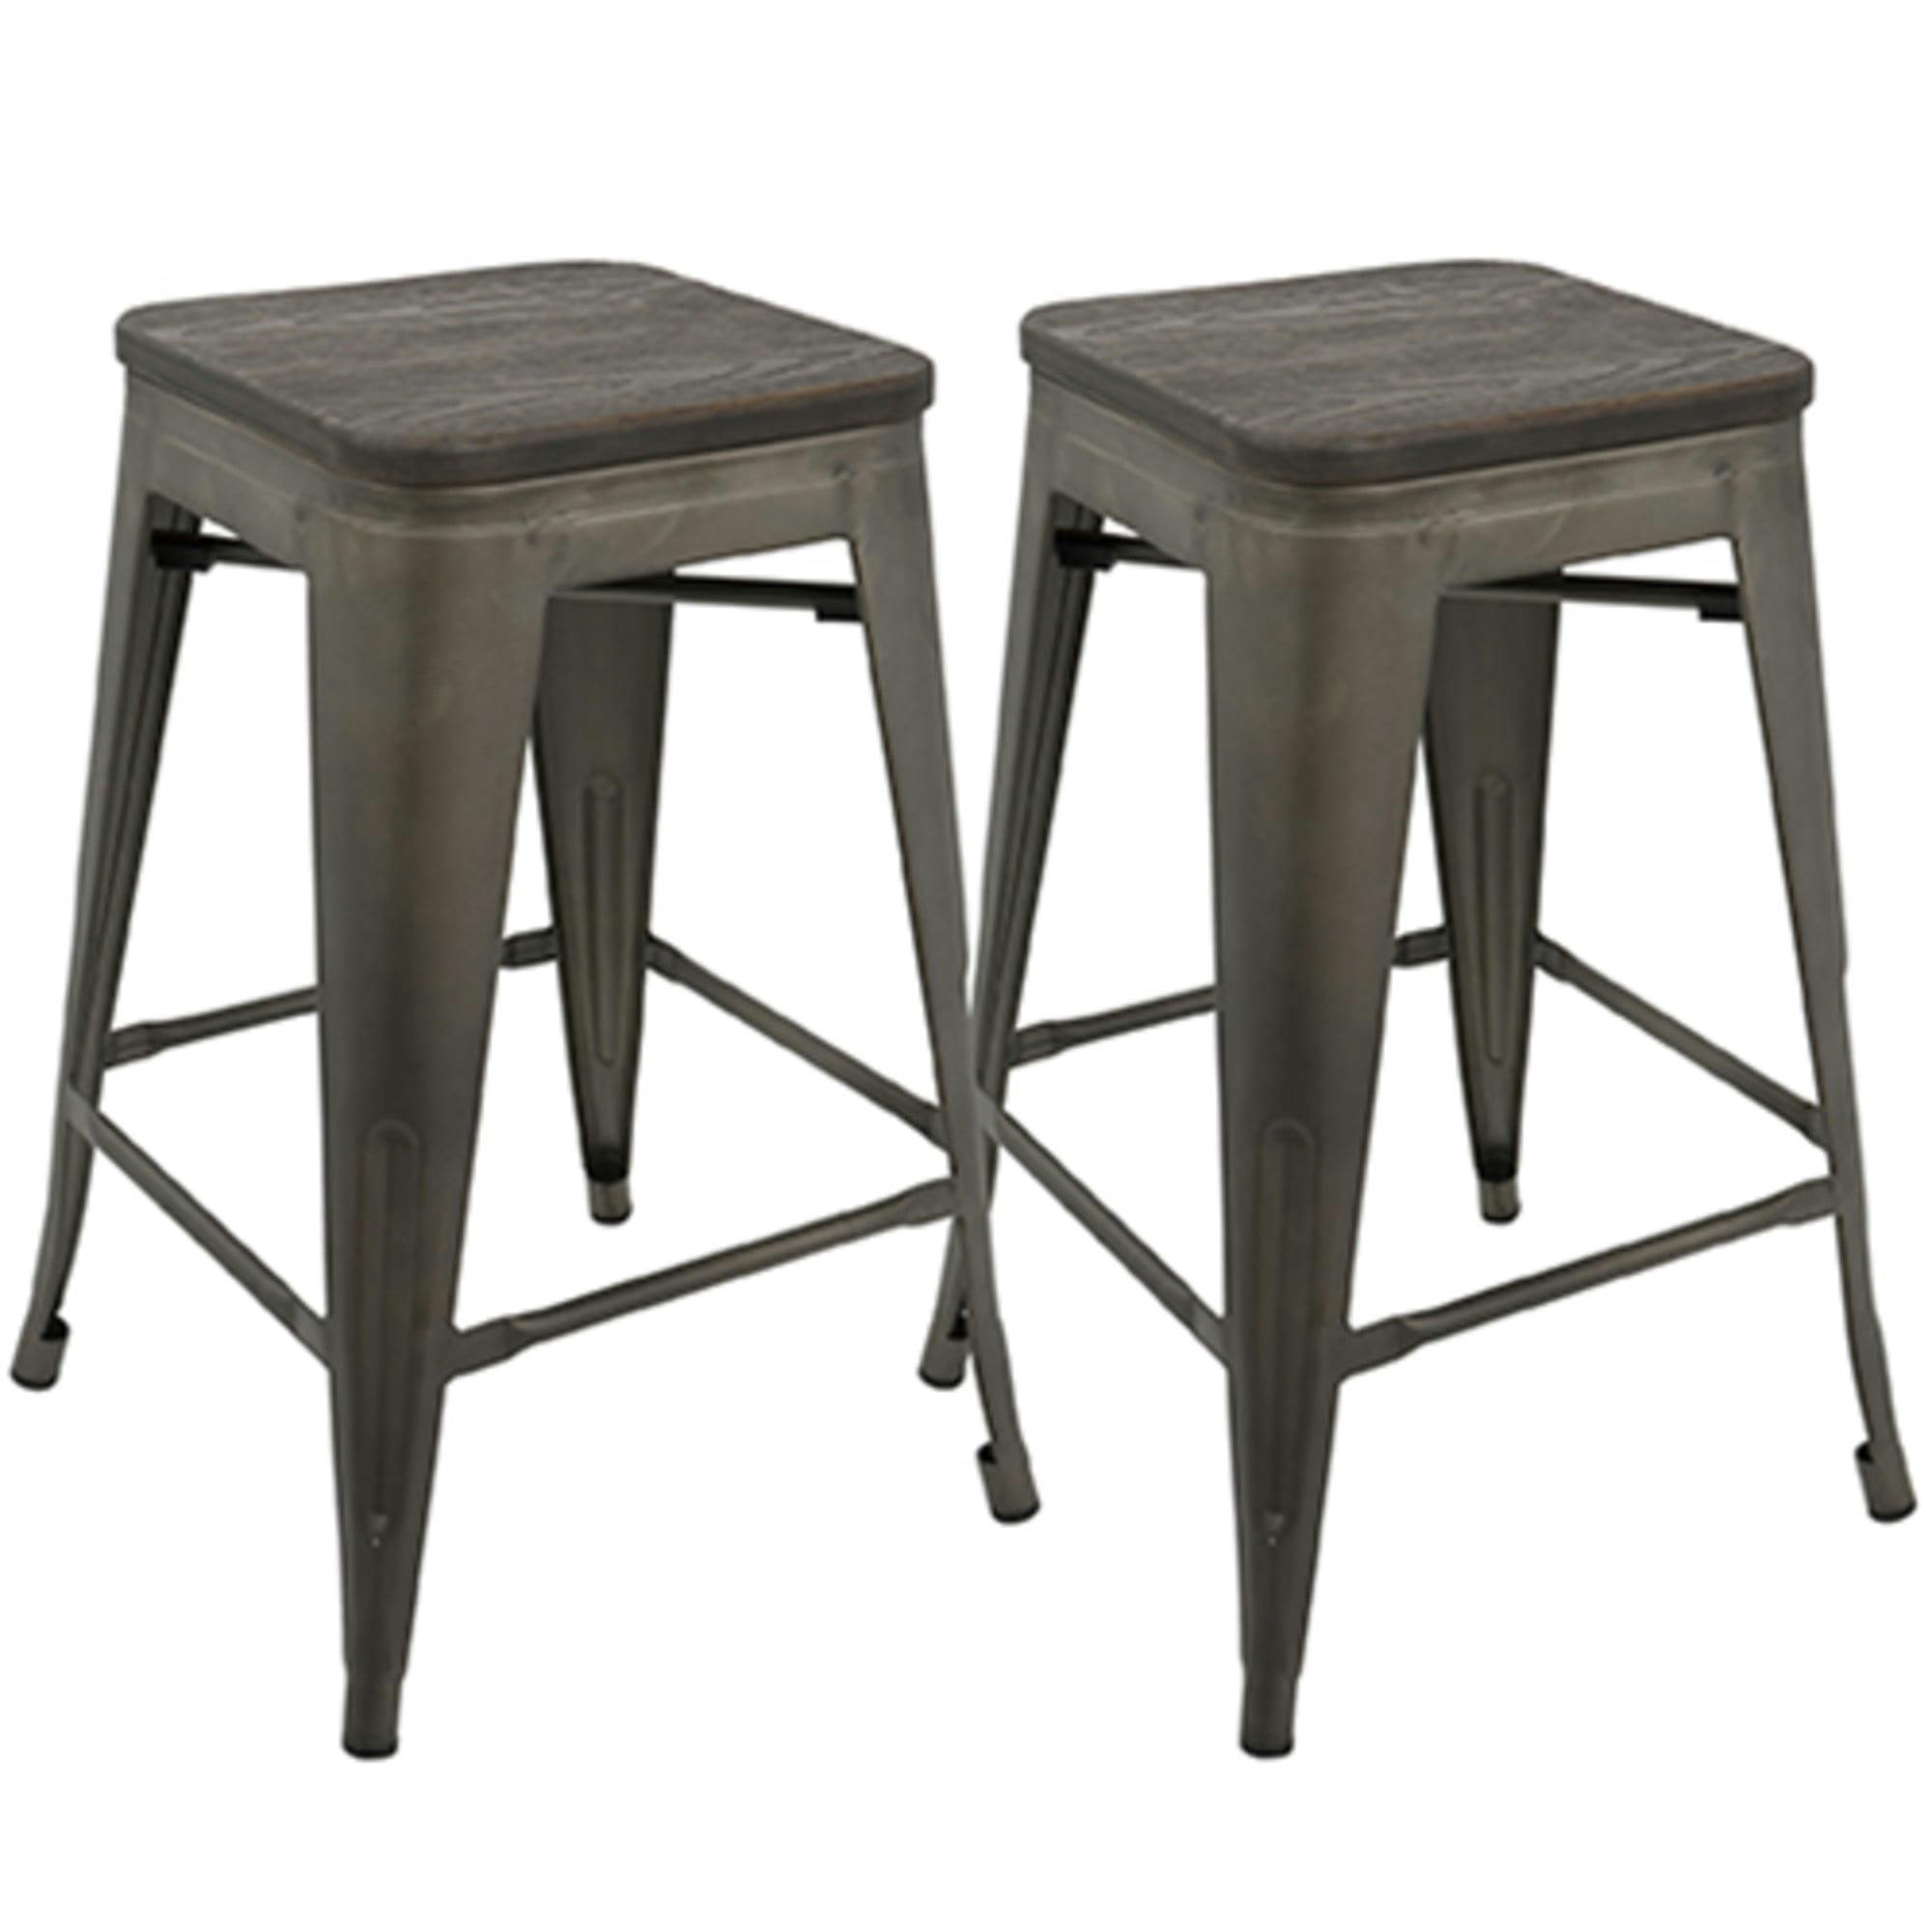 Metal and Wood Backless Arwen Counter Stools Set Of 2